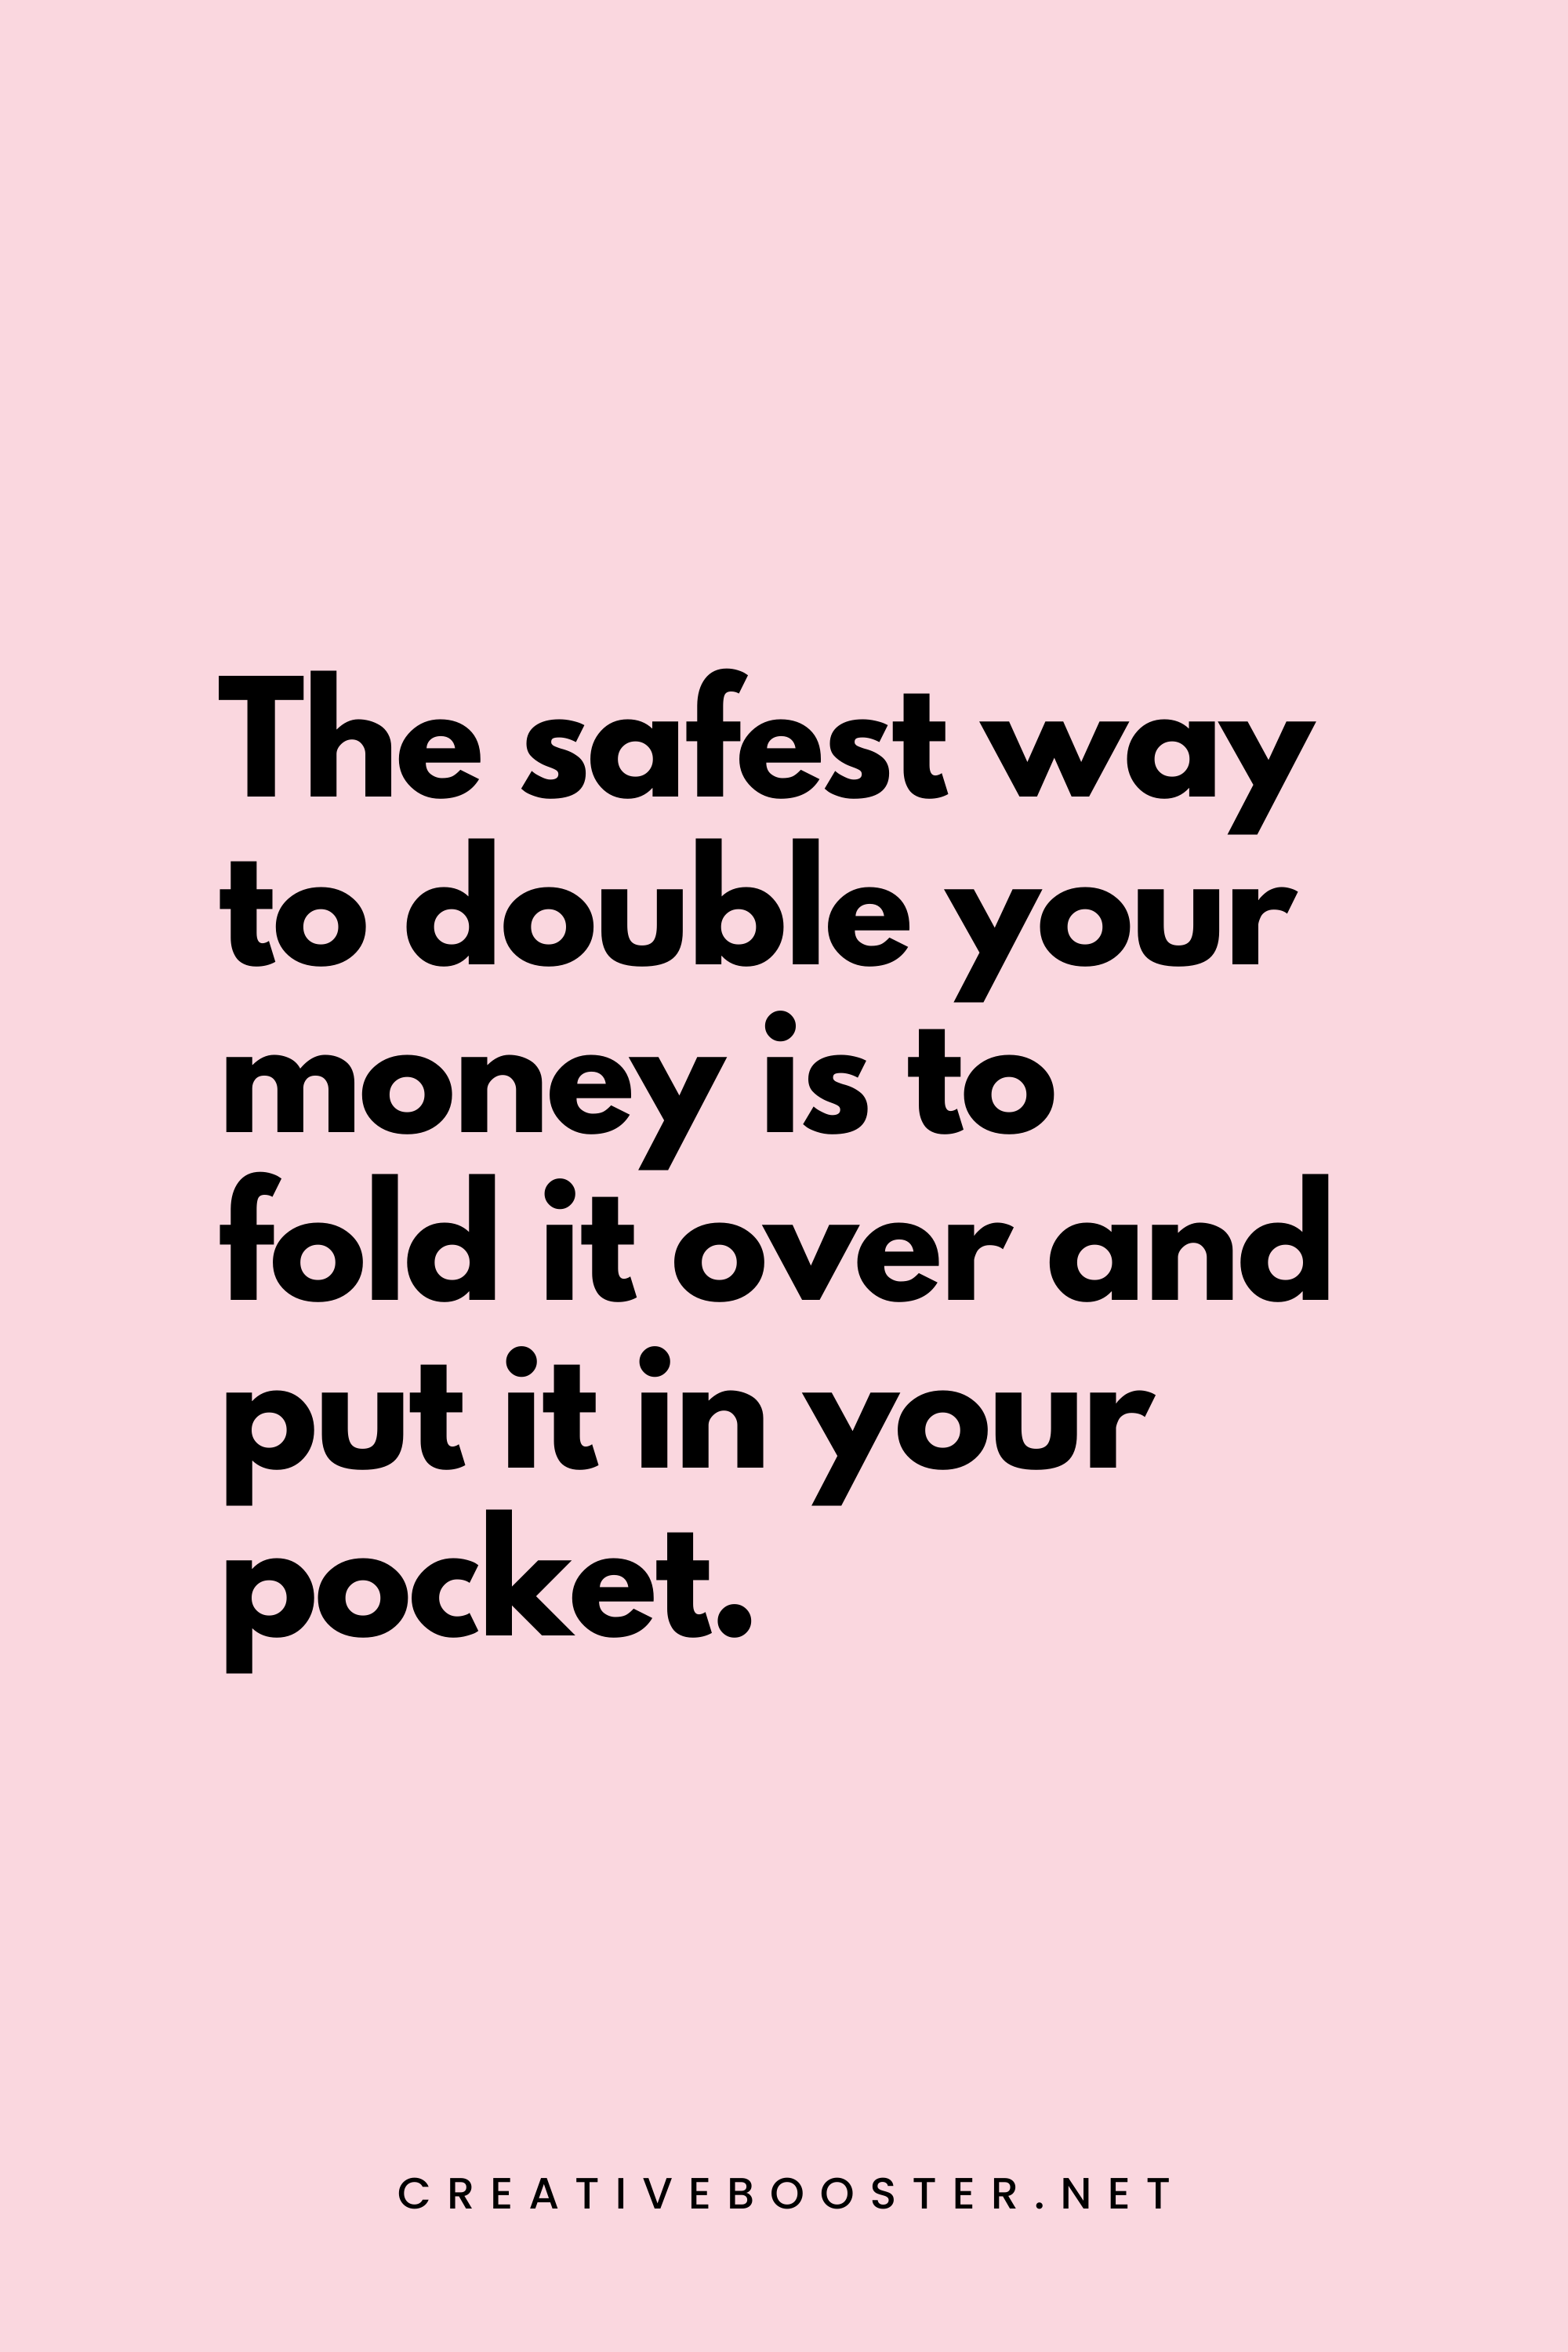 28. The safest way to double your money is to fold it over and put it in your pocket. - Kin Hubbard - 3. Financial Freedom Quotes for Students